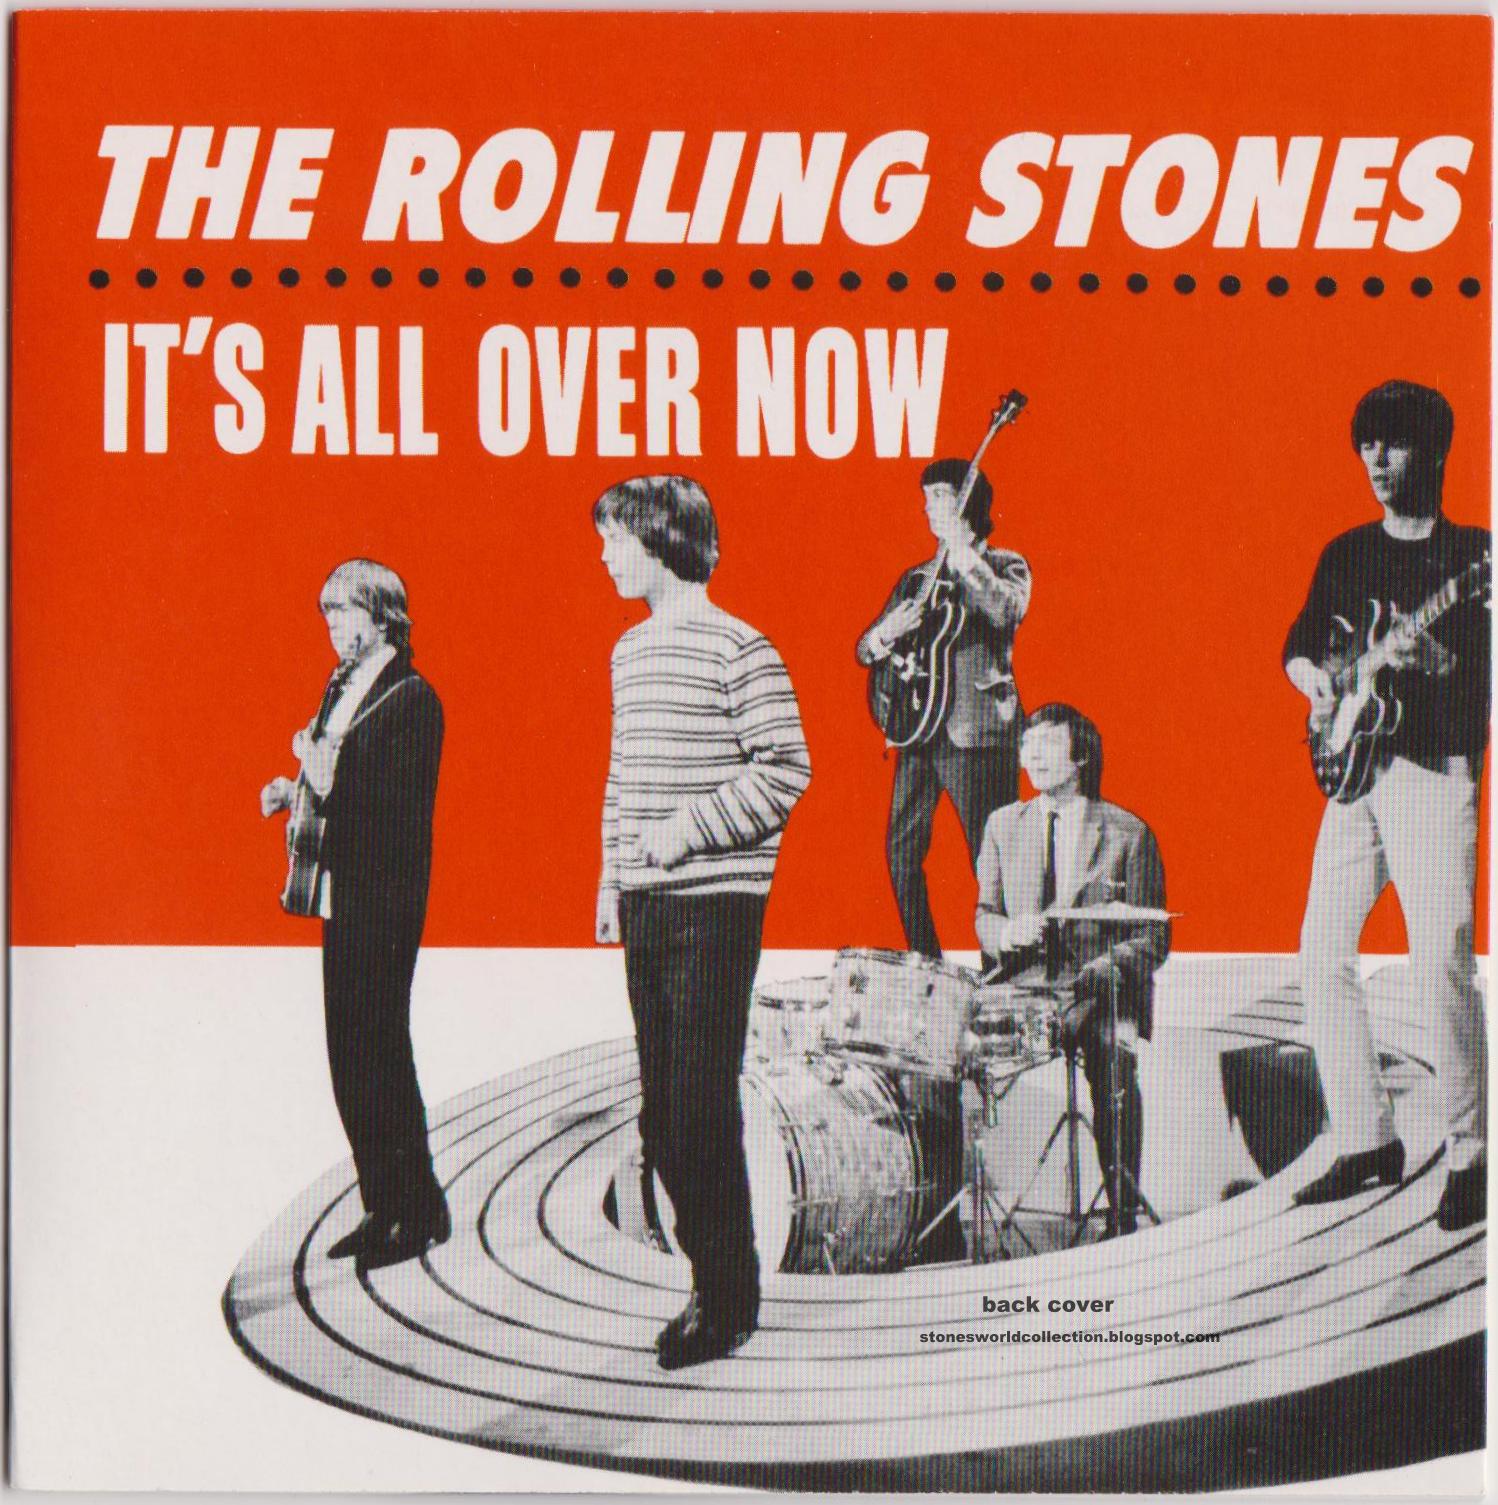 Rolling now. The Rolling Stones 1964 Cover. Роллинг стоунз 1964 год. Роллинг стоунз обложки альбомов. Обложка альбома Rolling Stones 12 x 5.